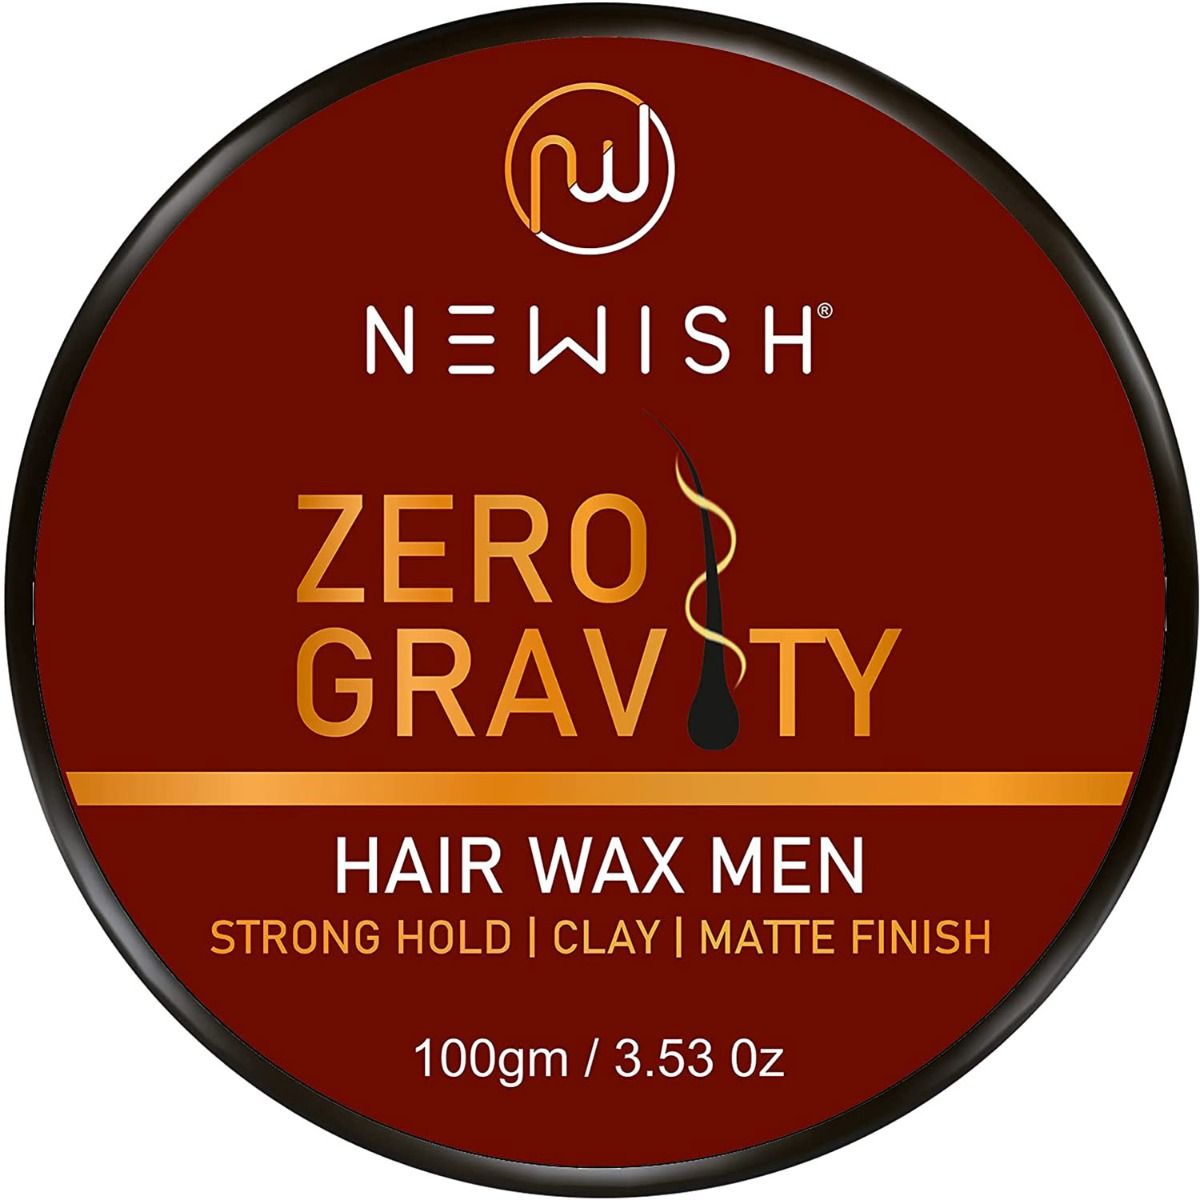 Newish Zero Gravity Hair Wax for Men, 100 gm Price, Uses, Side Effects,  Composition - Apollo Pharmacy